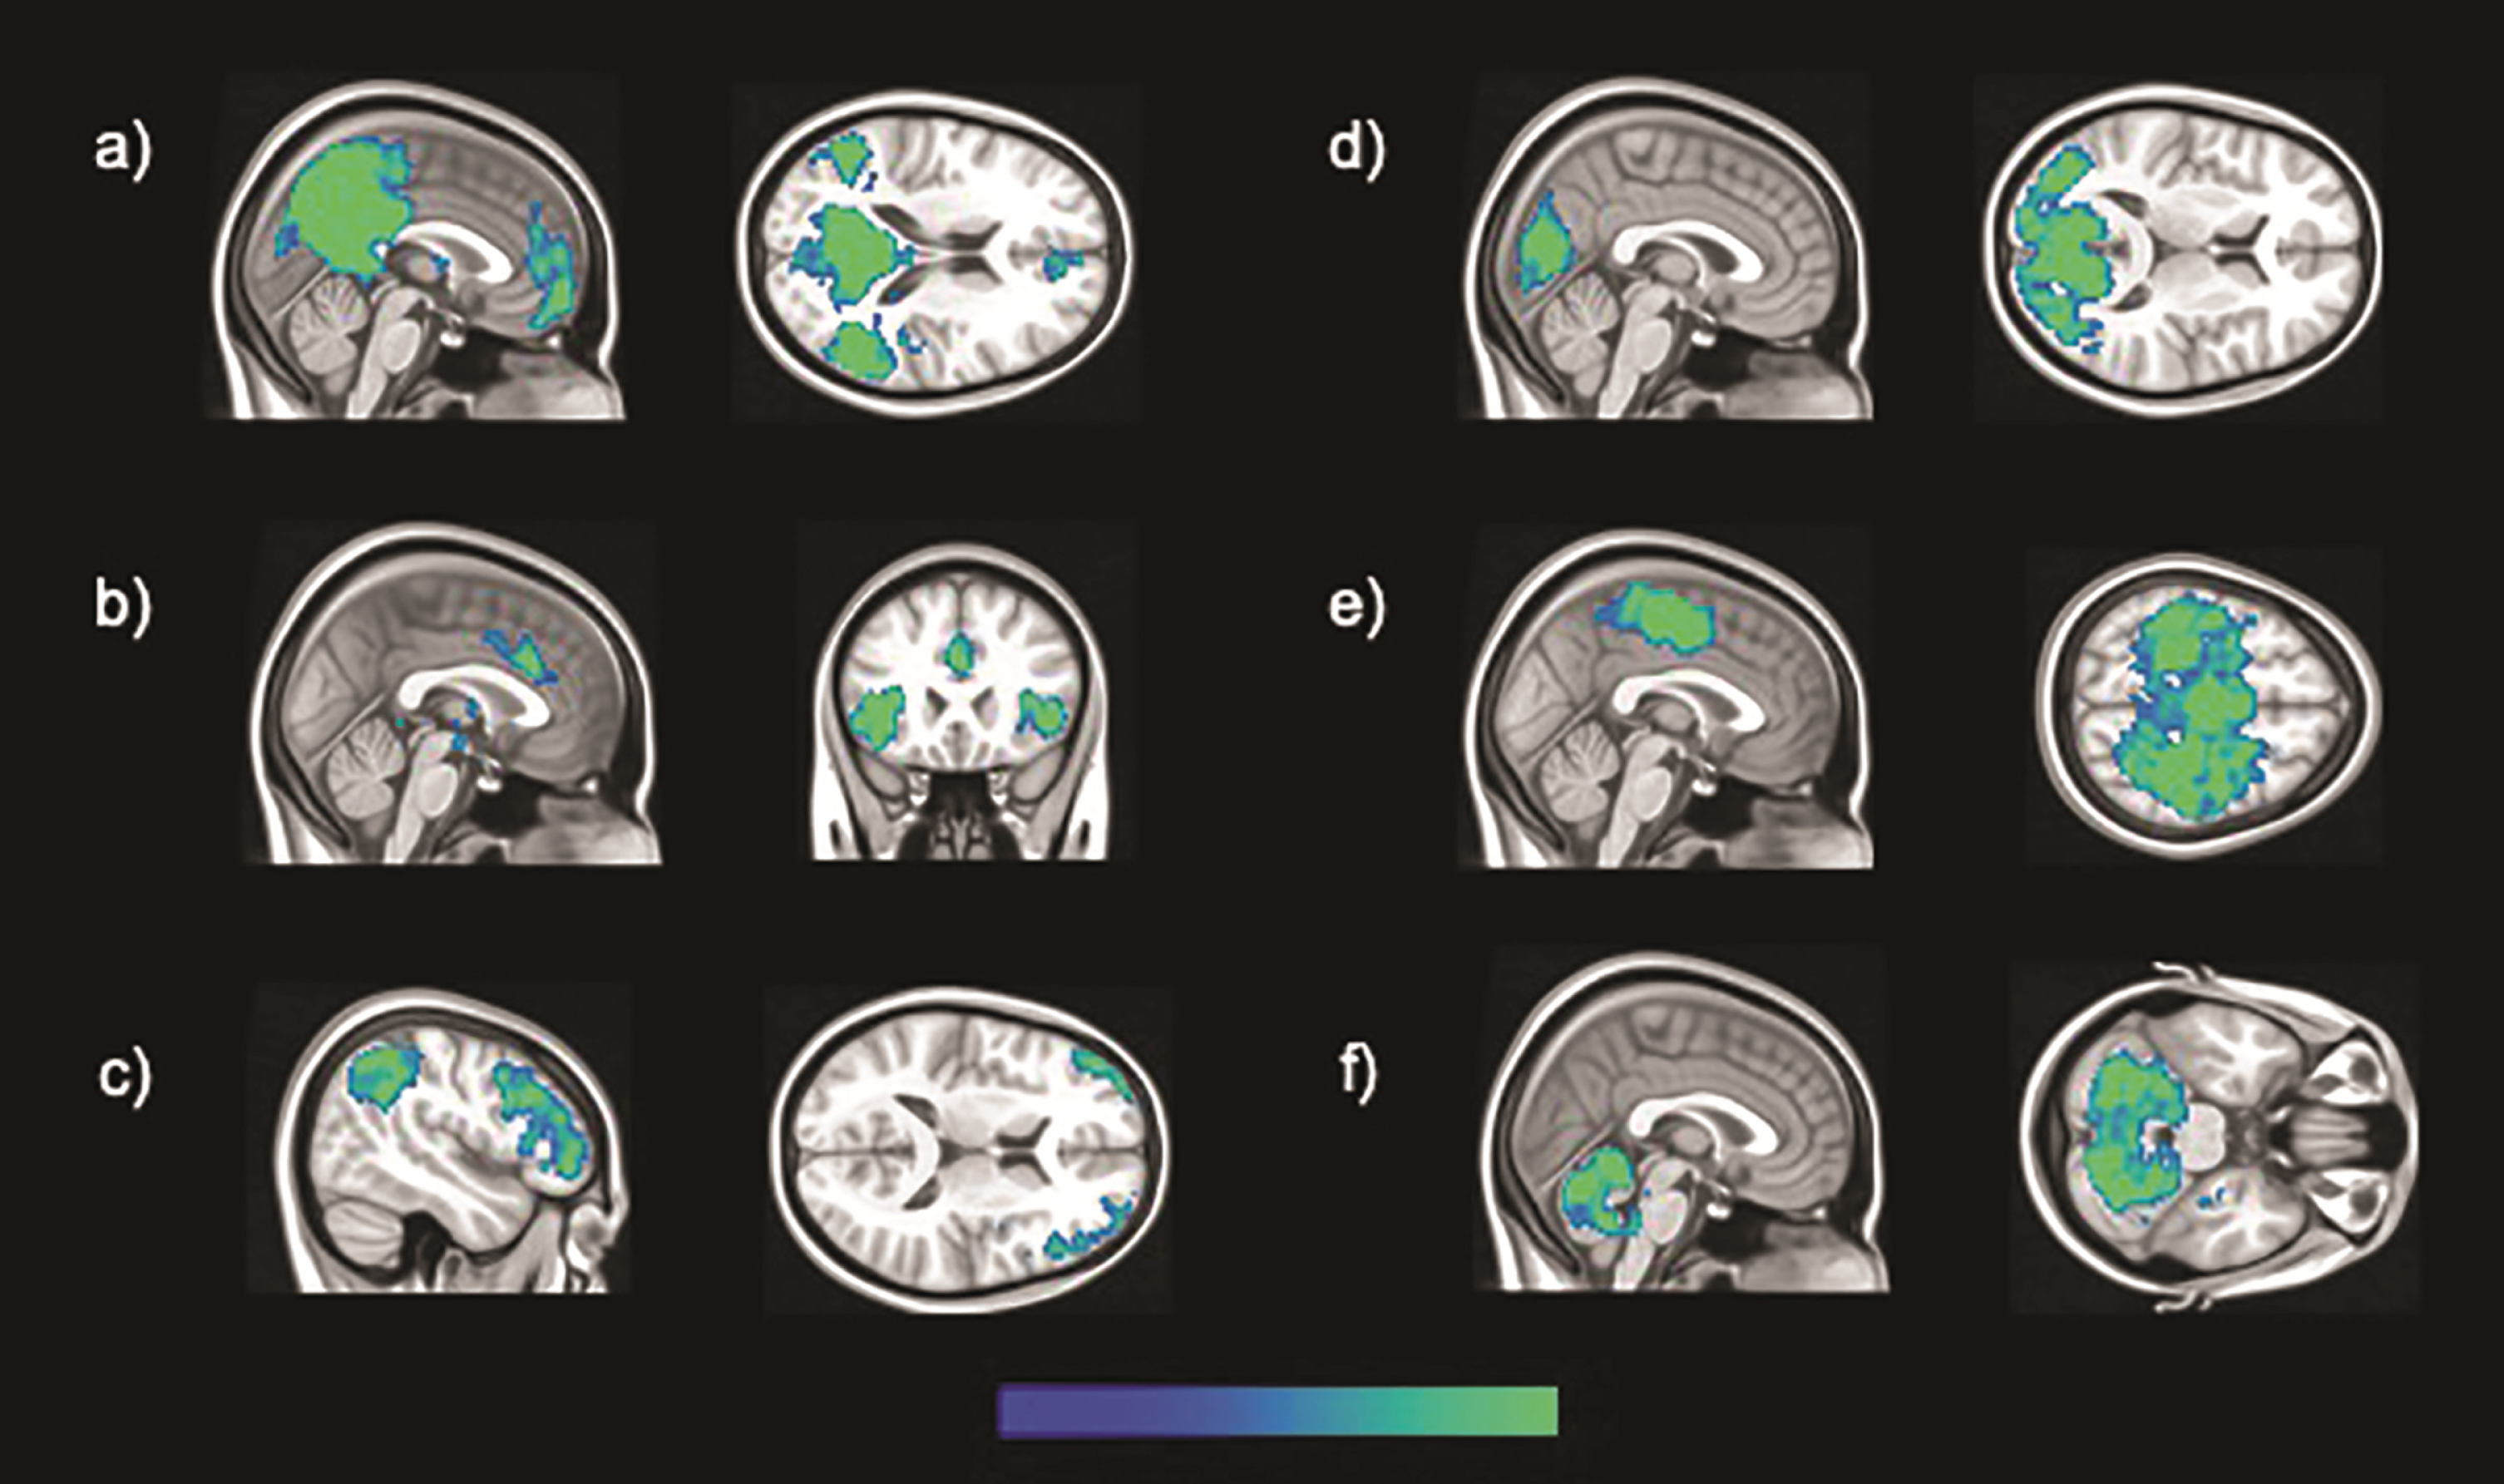 The six brain large-scale brain functional networks investigated in this study, specifically: a) DMN, b) salience, c) fronto-parietal, d) occipital, e) sensory-motor, and f) cerebellar networks.